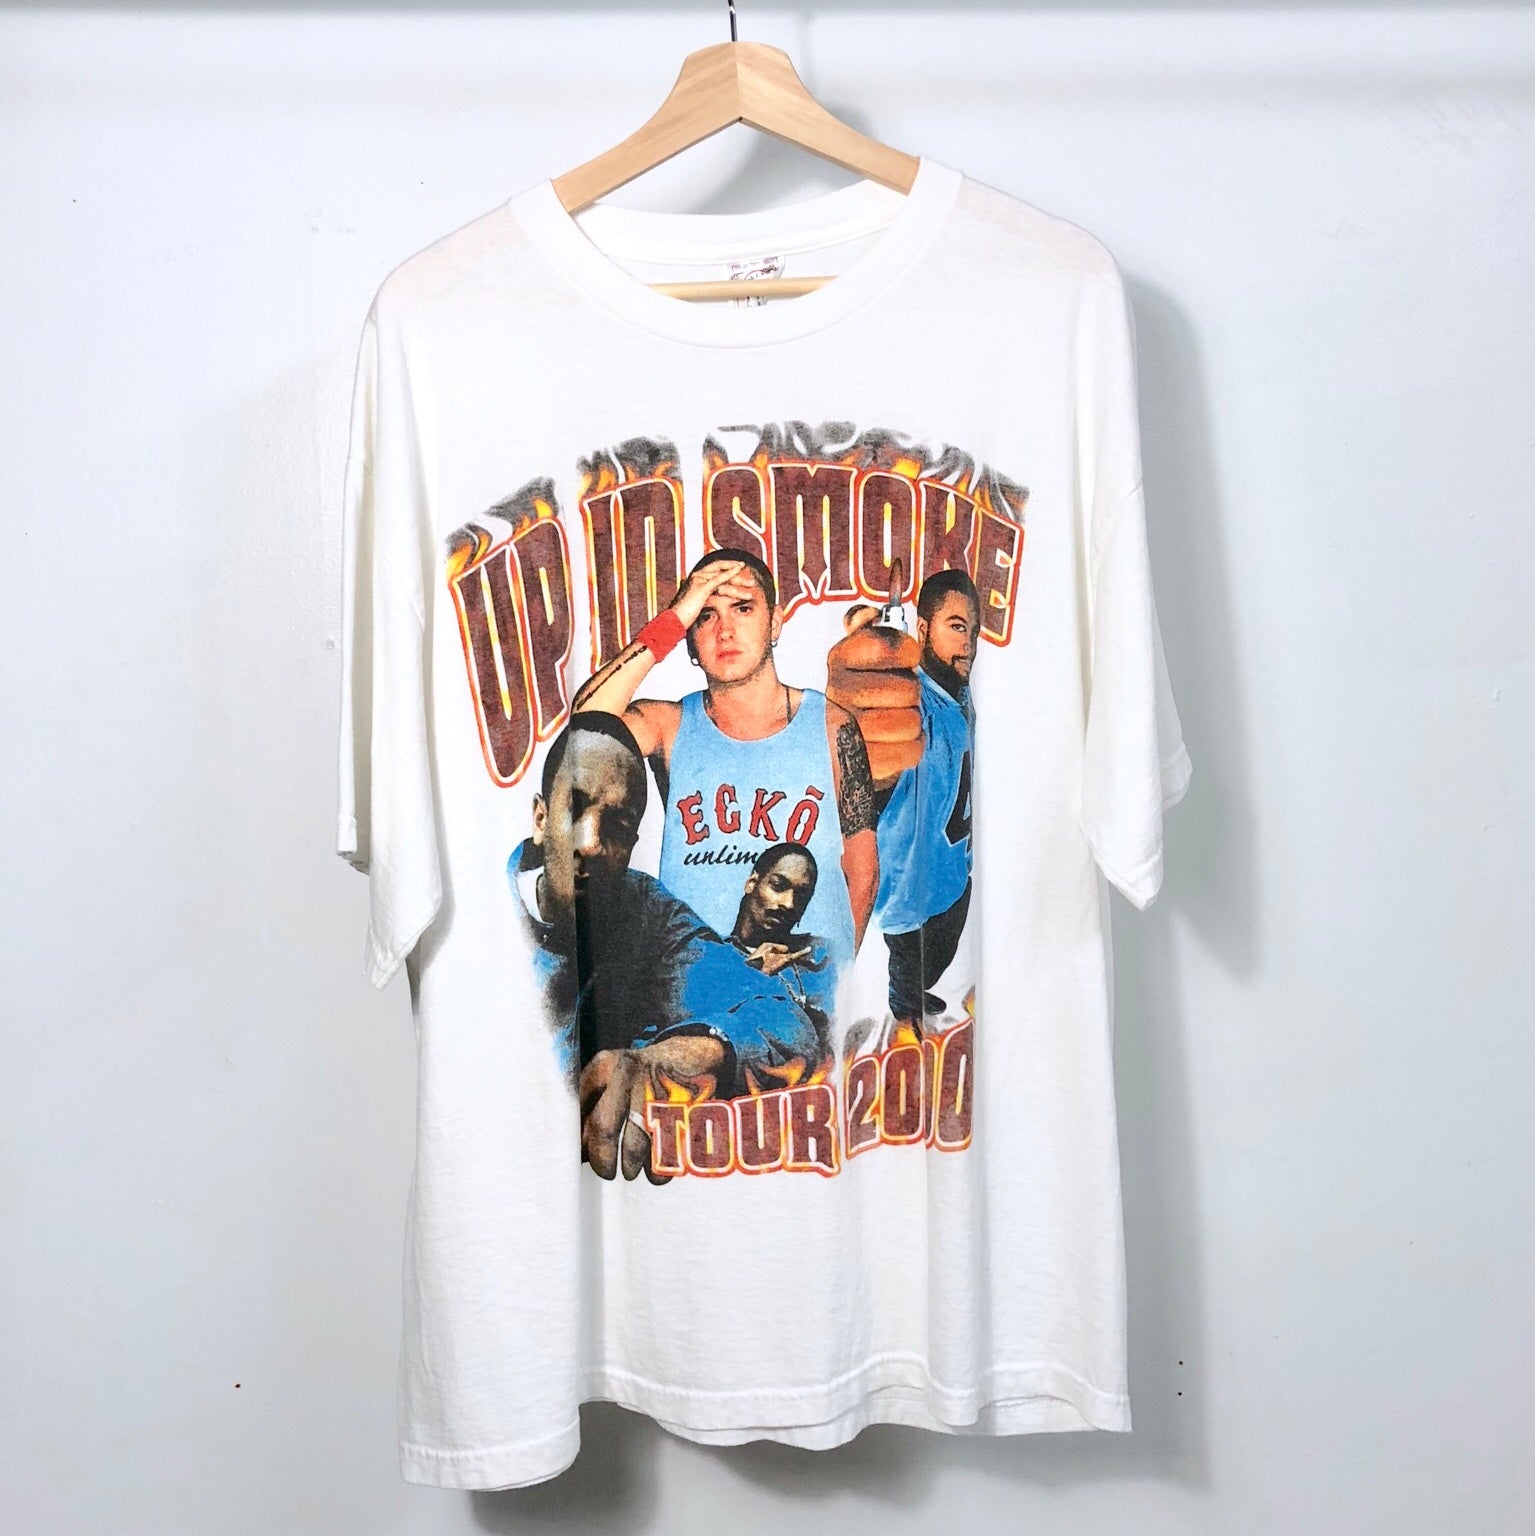 The up in smoke tour 2000 tシャツ